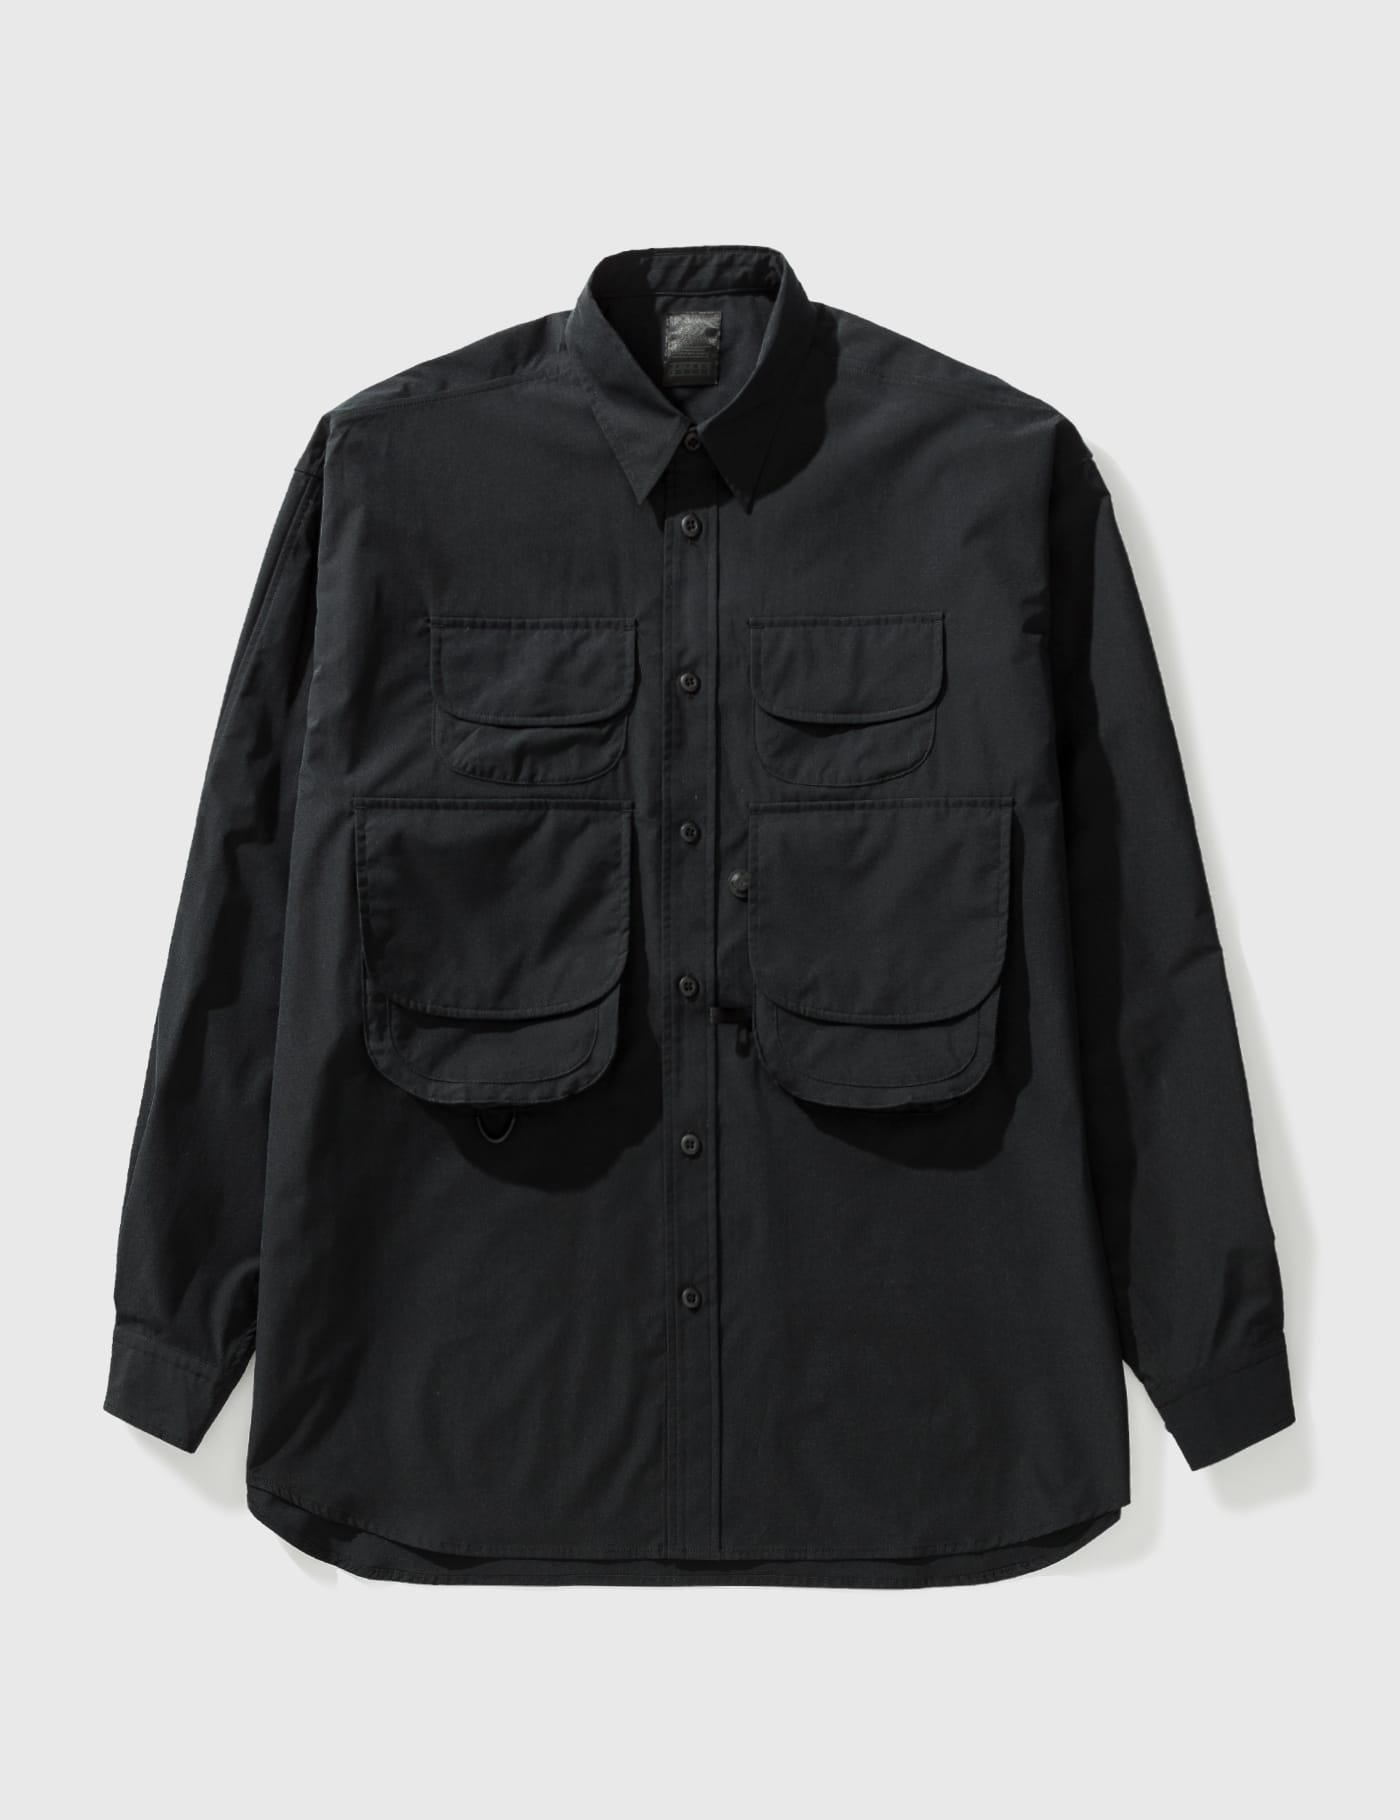 DAIWA PIER39 - Tech New Angler's Shirt | HBX - Globally Curated Fashion and  Lifestyle by Hypebeast